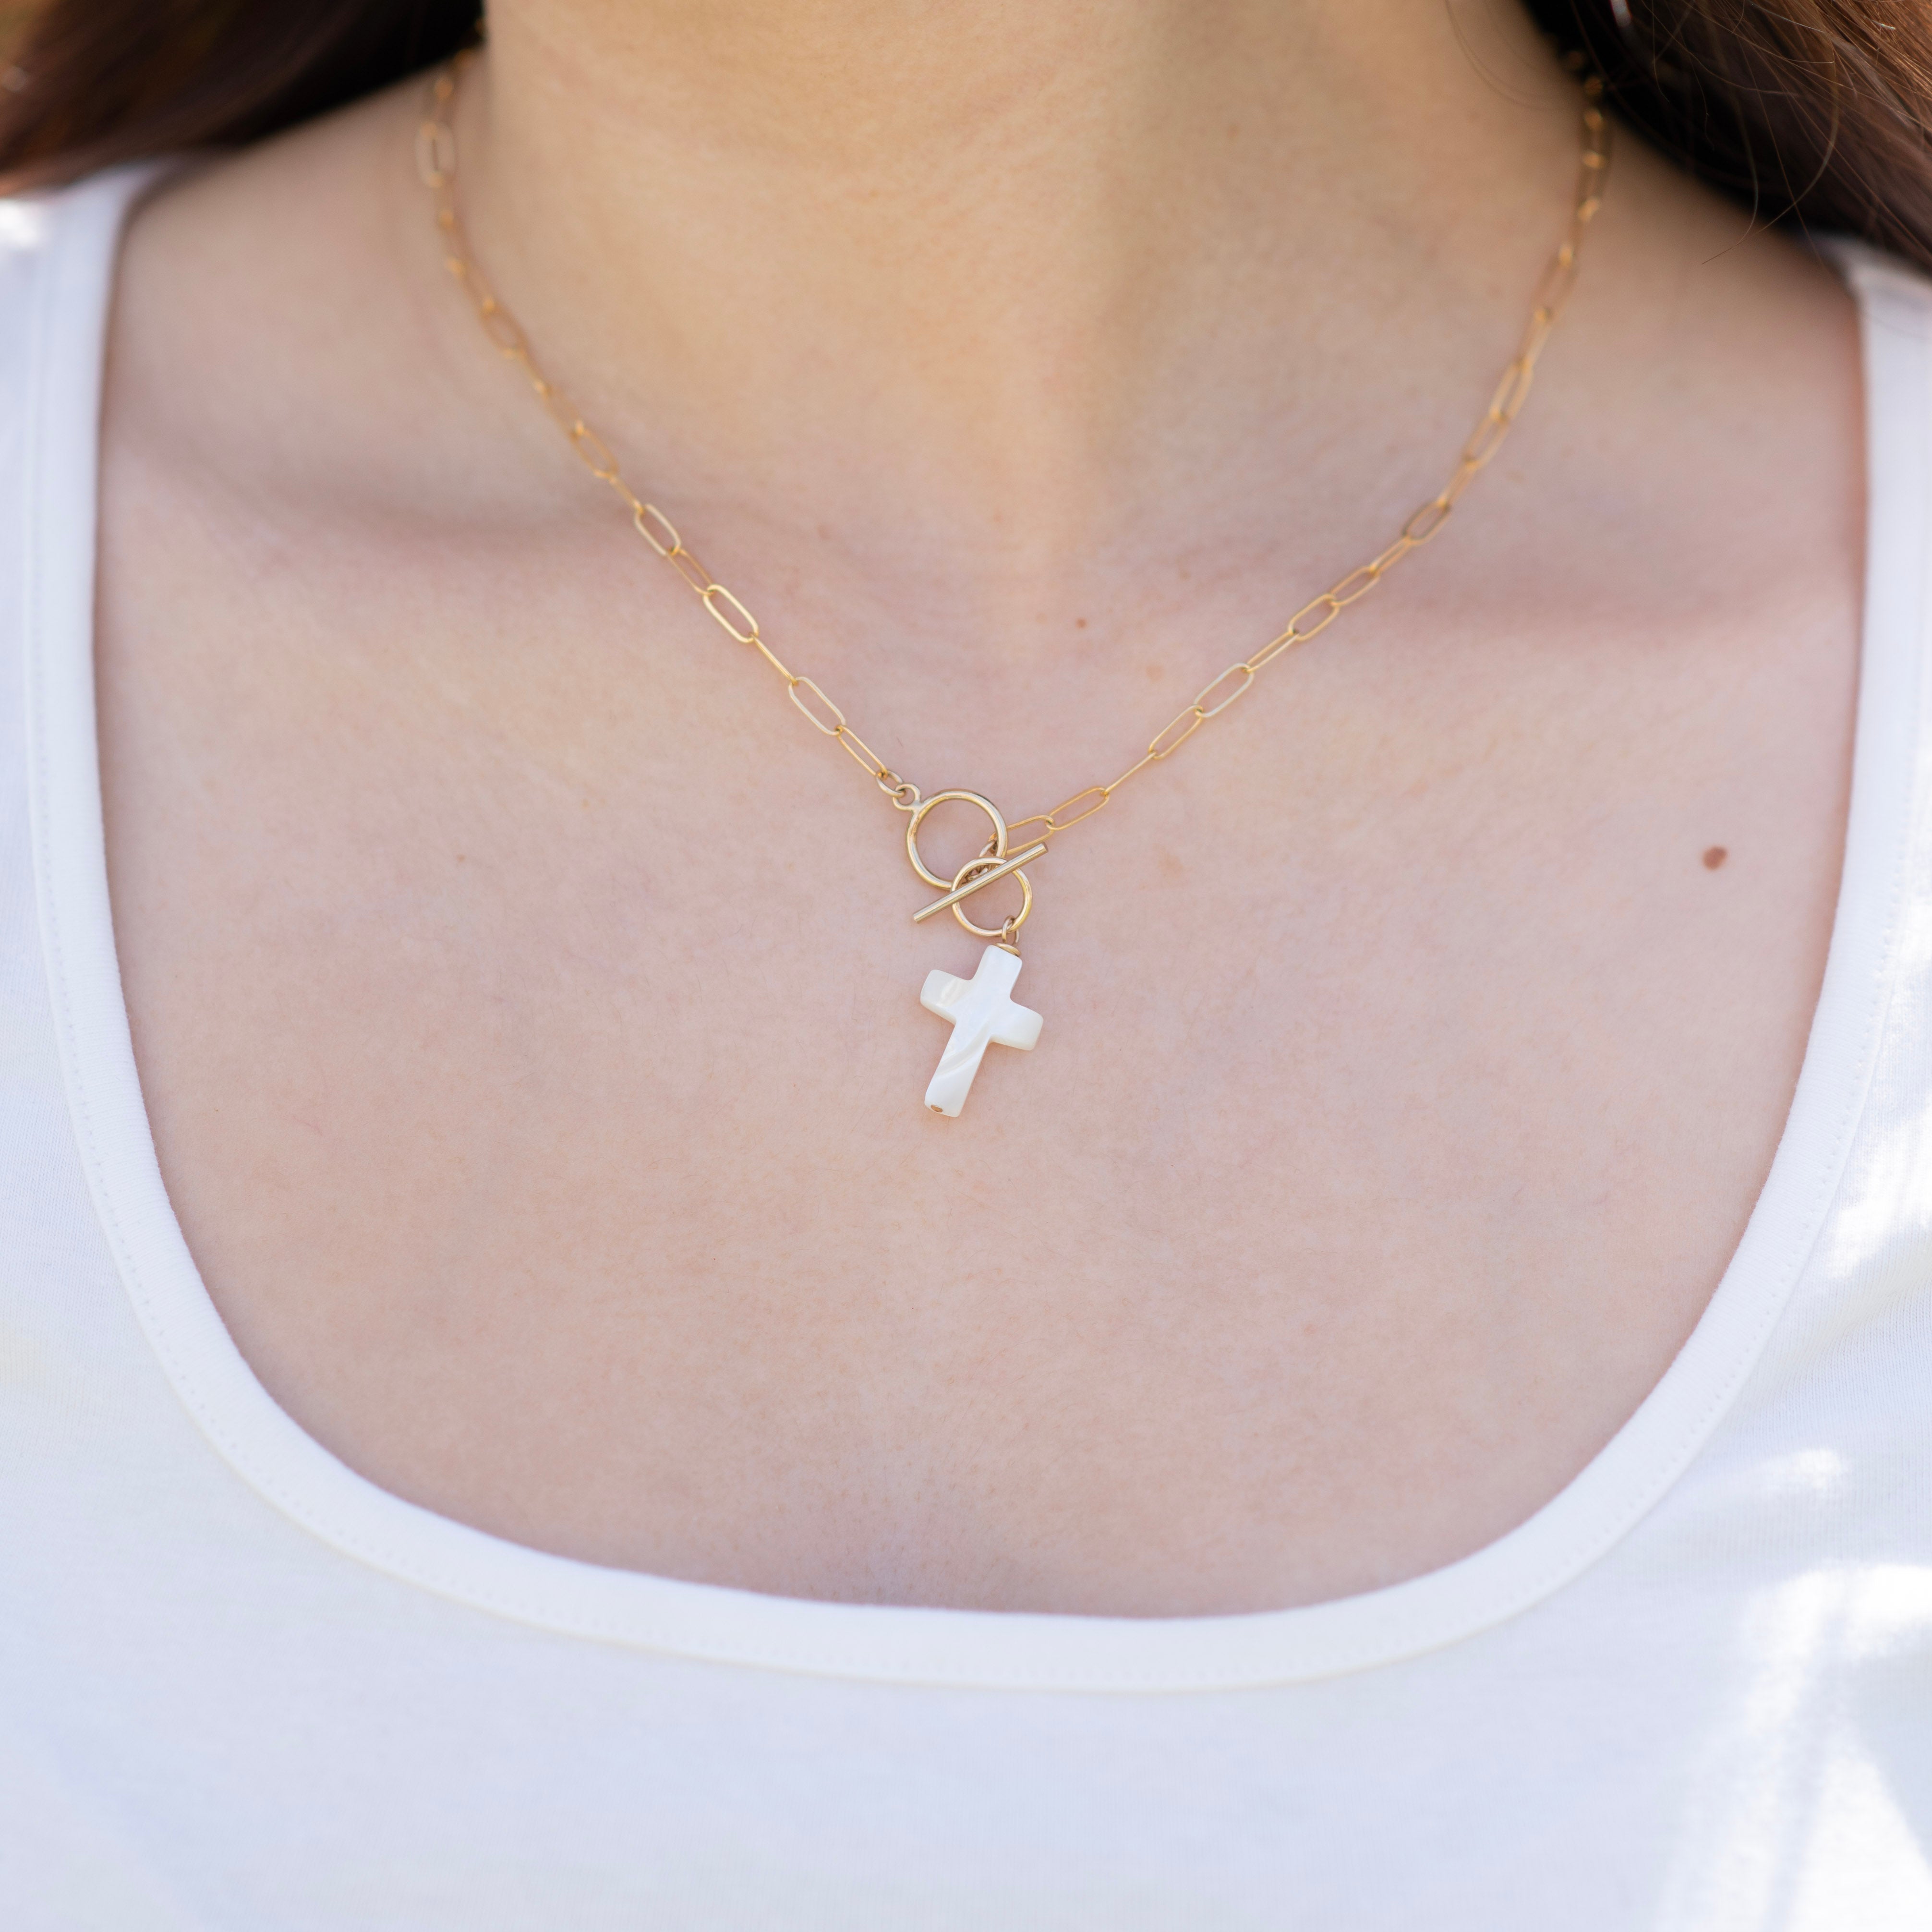 Medium 14k Gold Filled Toggle Necklace & Mother of Pearl Cross Charm Set